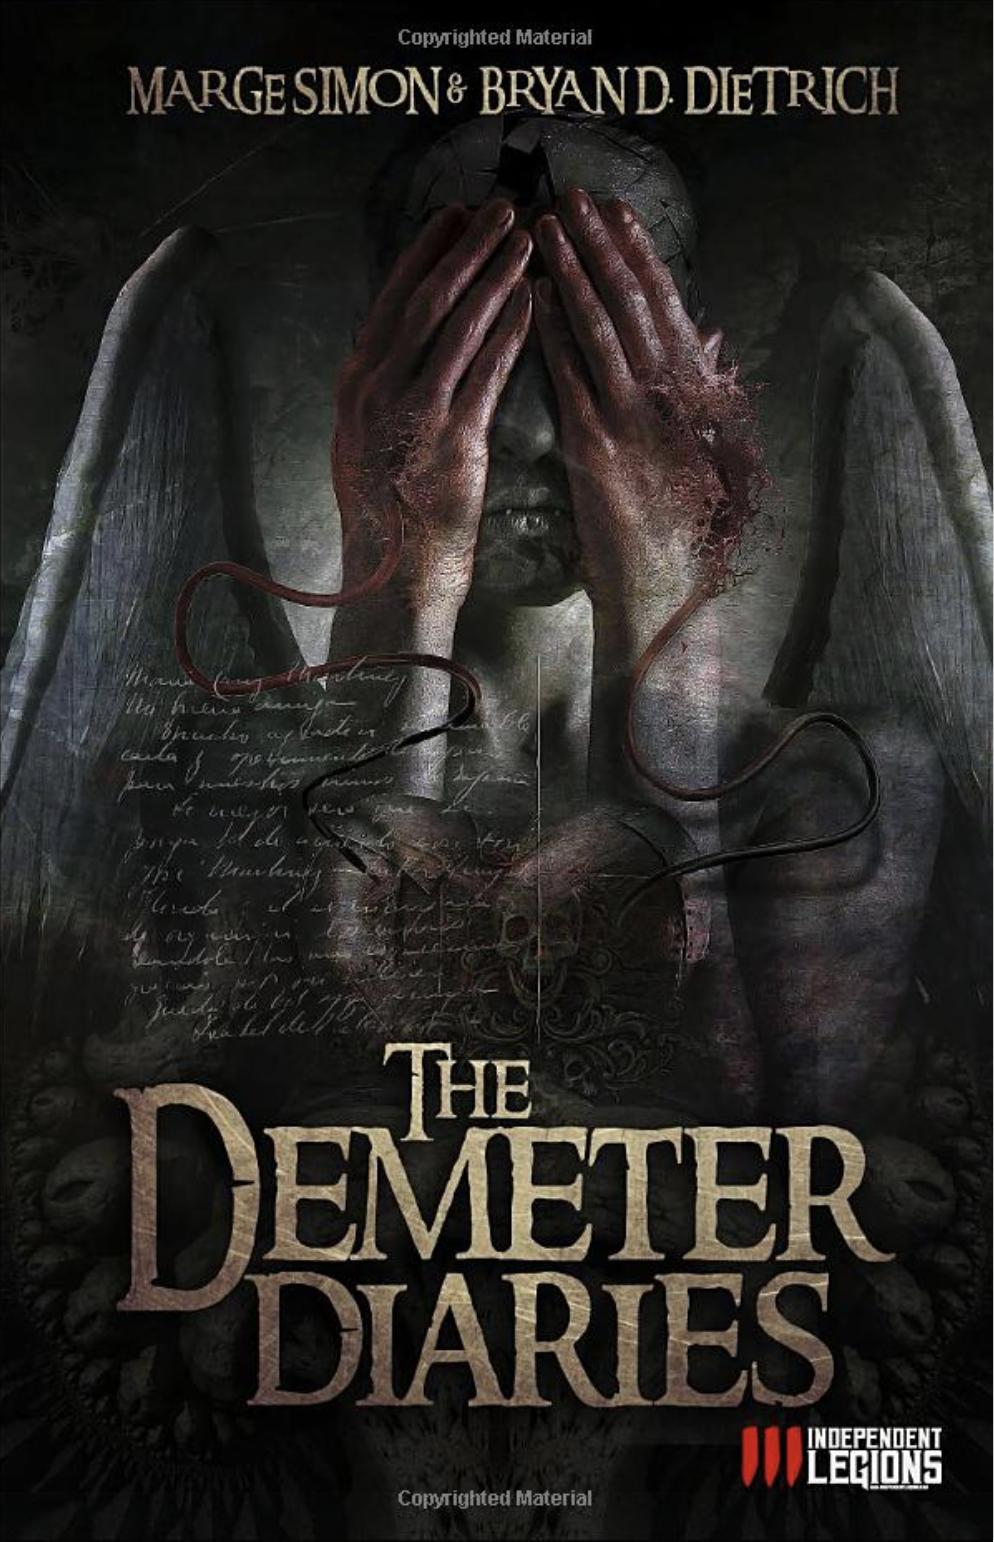 Professor Dietrich's 'The Demeter Diaries' gets published